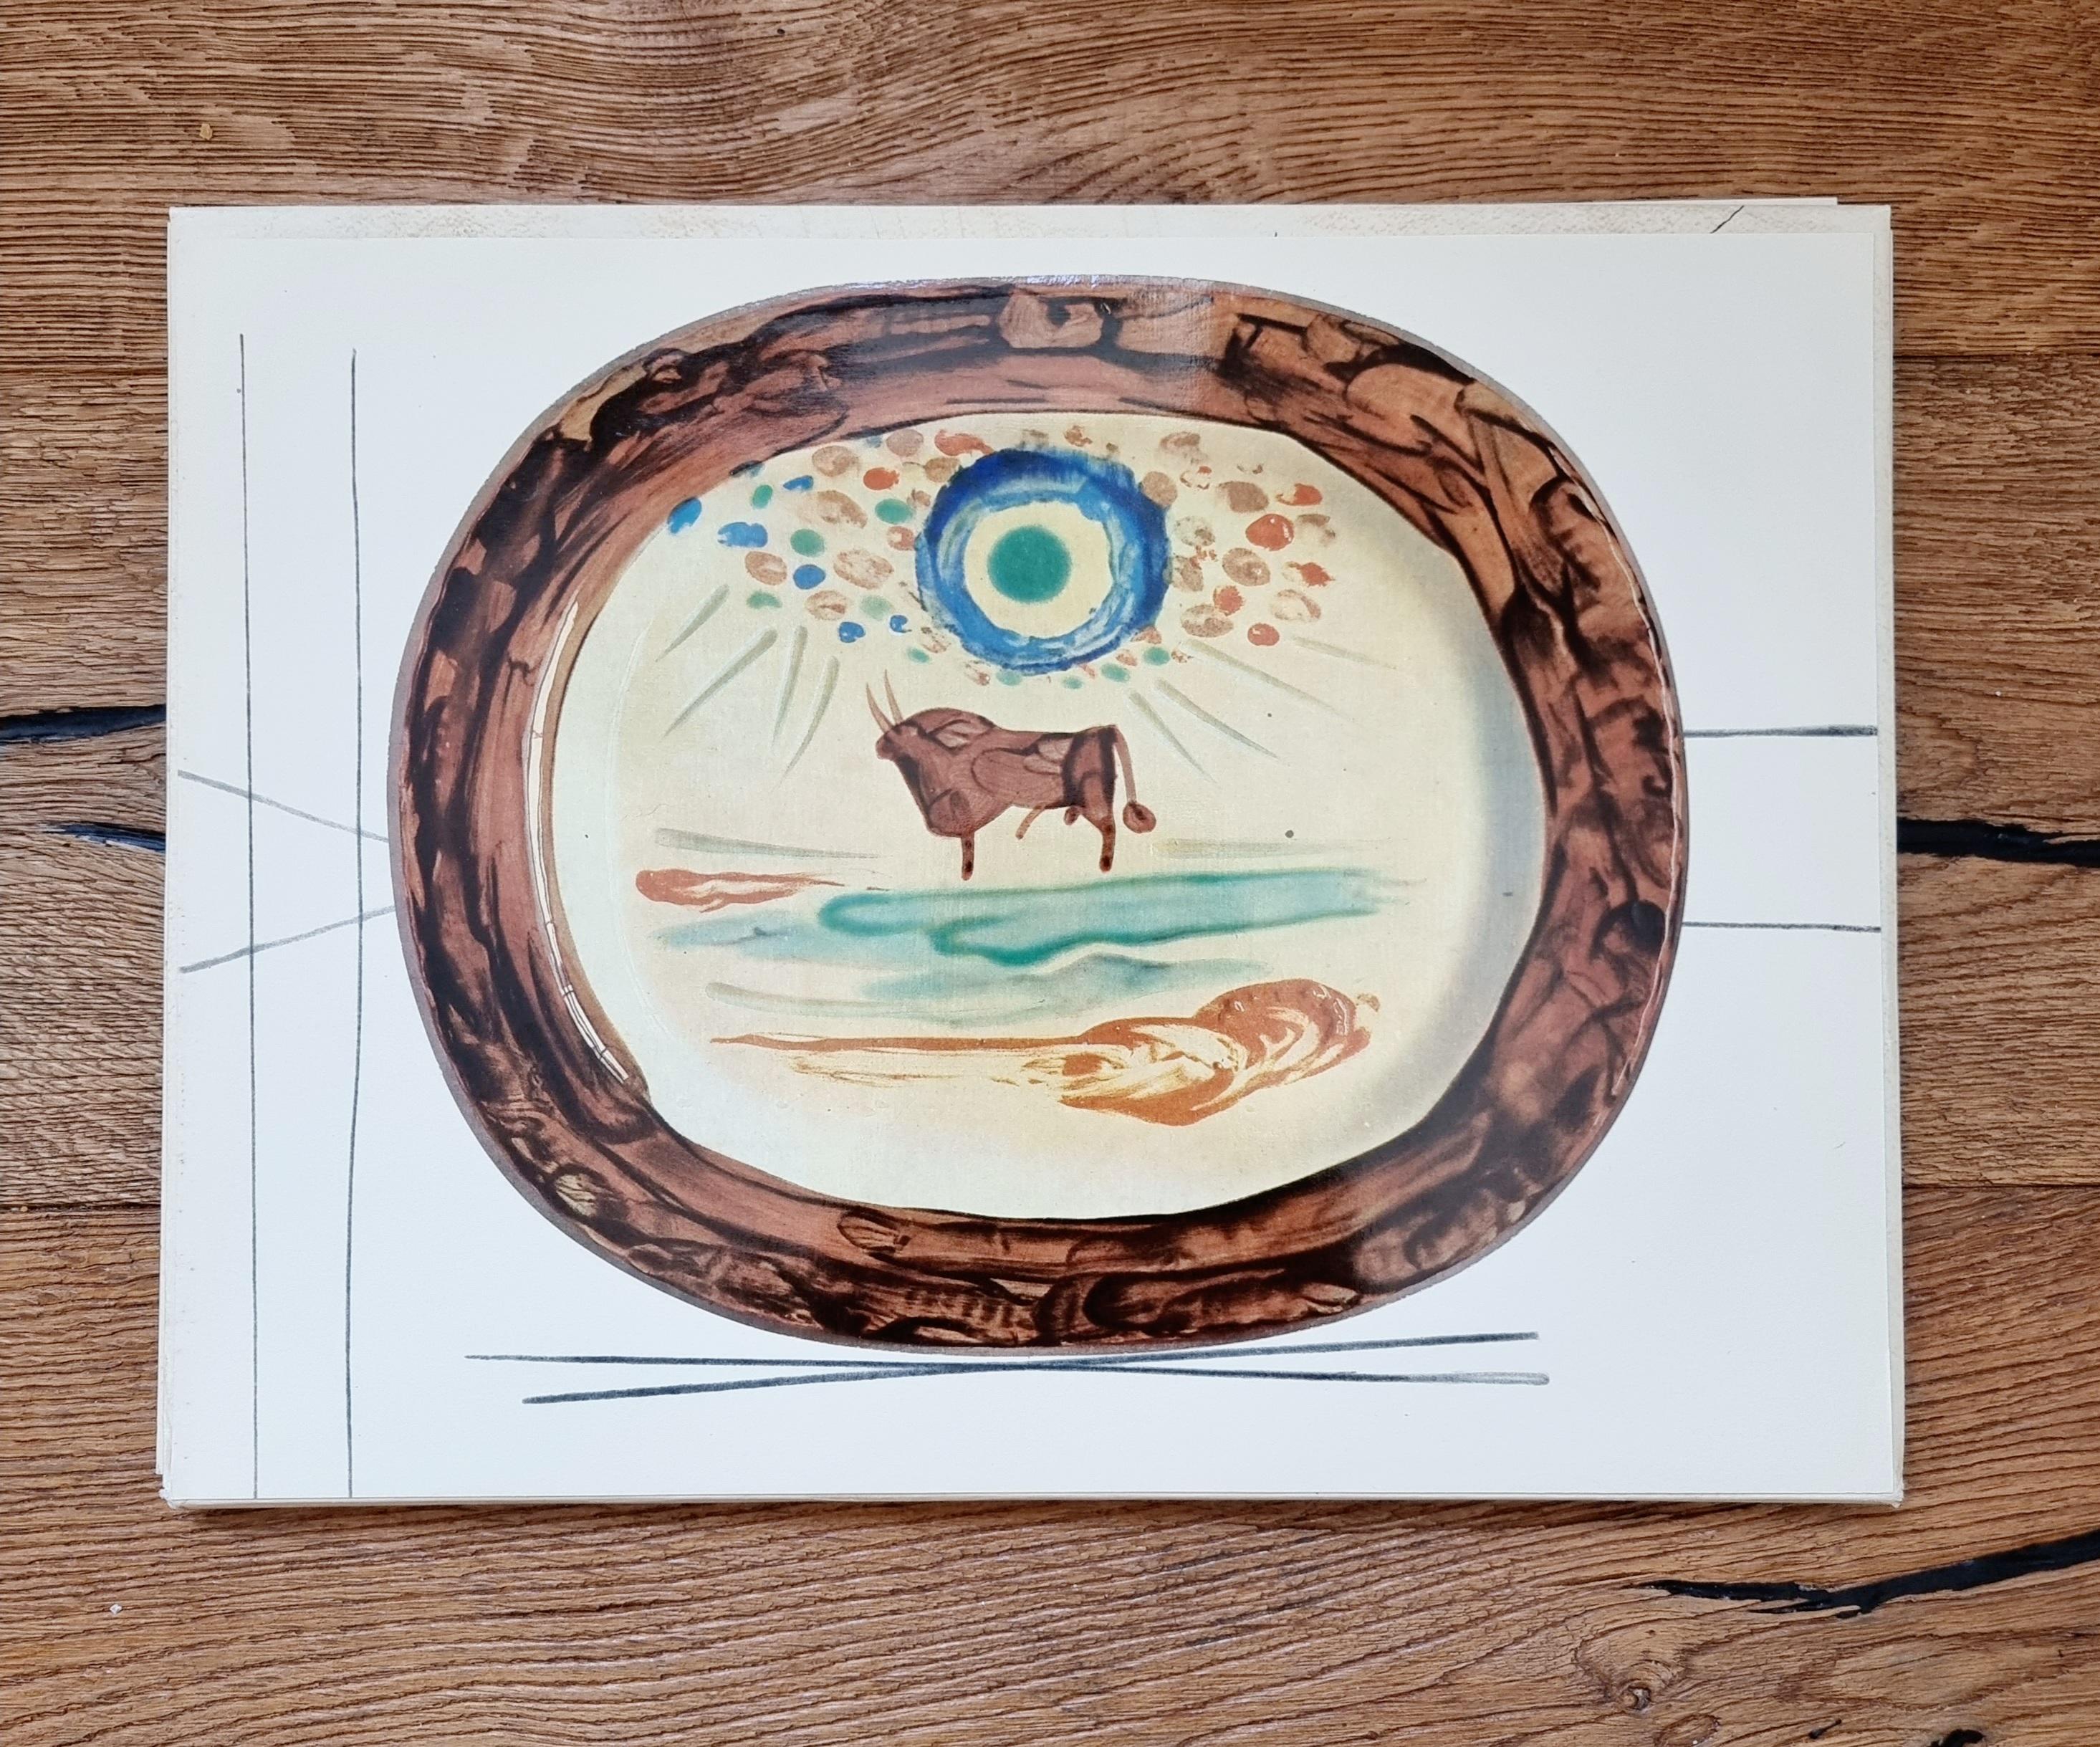 An exquisite shiny polychrome print of Picasso Vallauris ceramic plate depicting a bull on a field. The color print is attached to a thick, high quality paper with decorative lines. 

The print is originally from a Limited Edition Art Folio